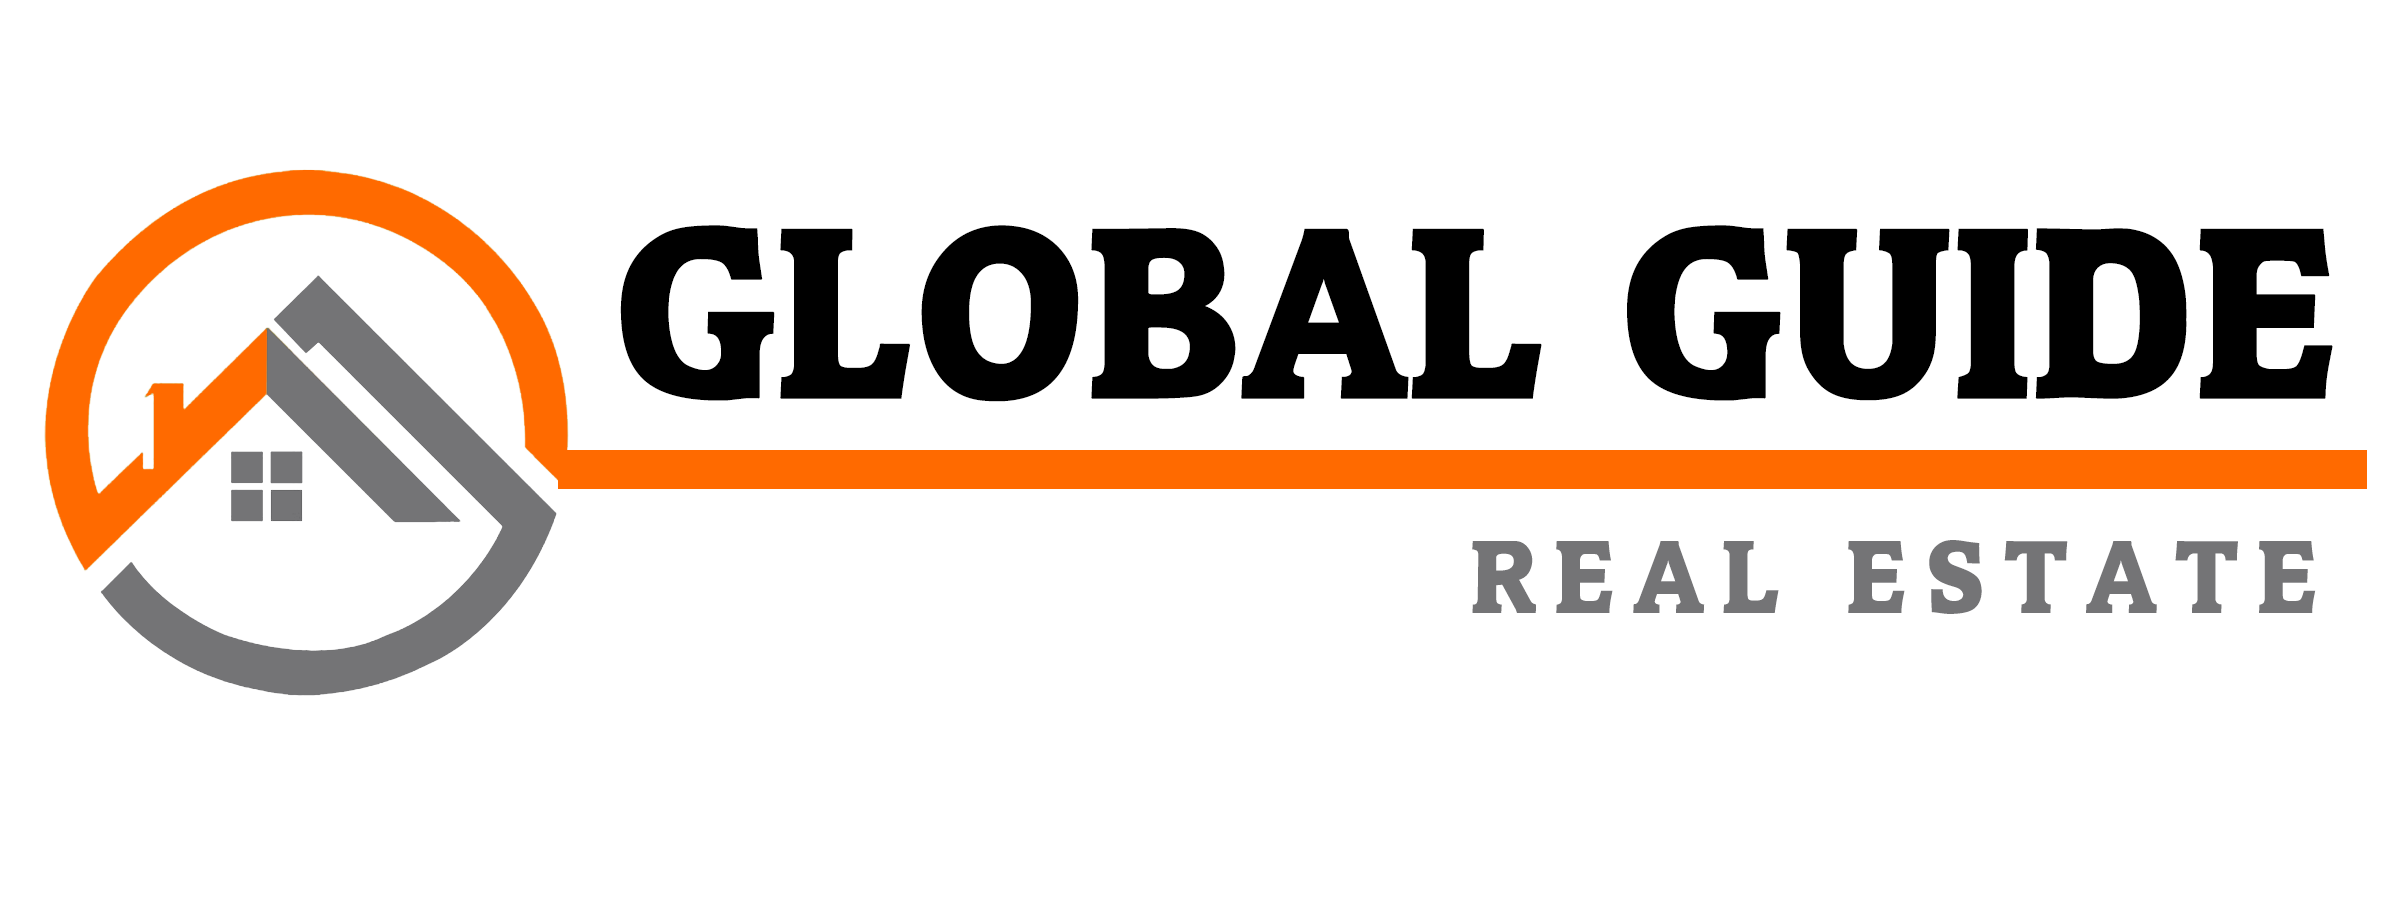 Real Estate Global Guide-We help people to find best investment opportunity in real estate around the world